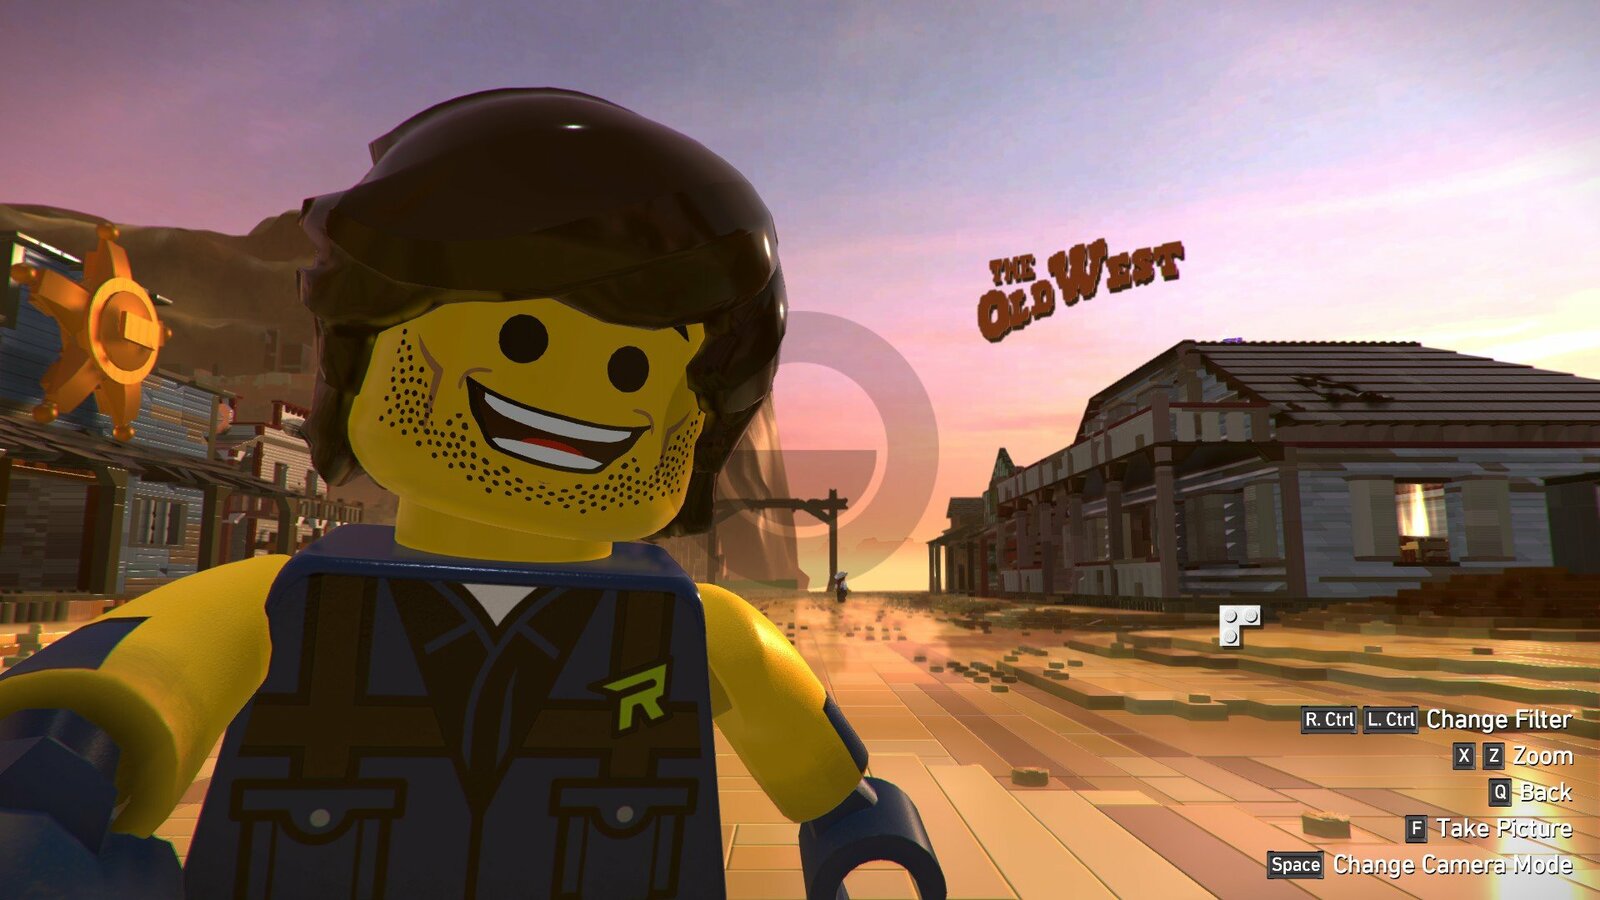 The LEGO Movie 2: Videogame